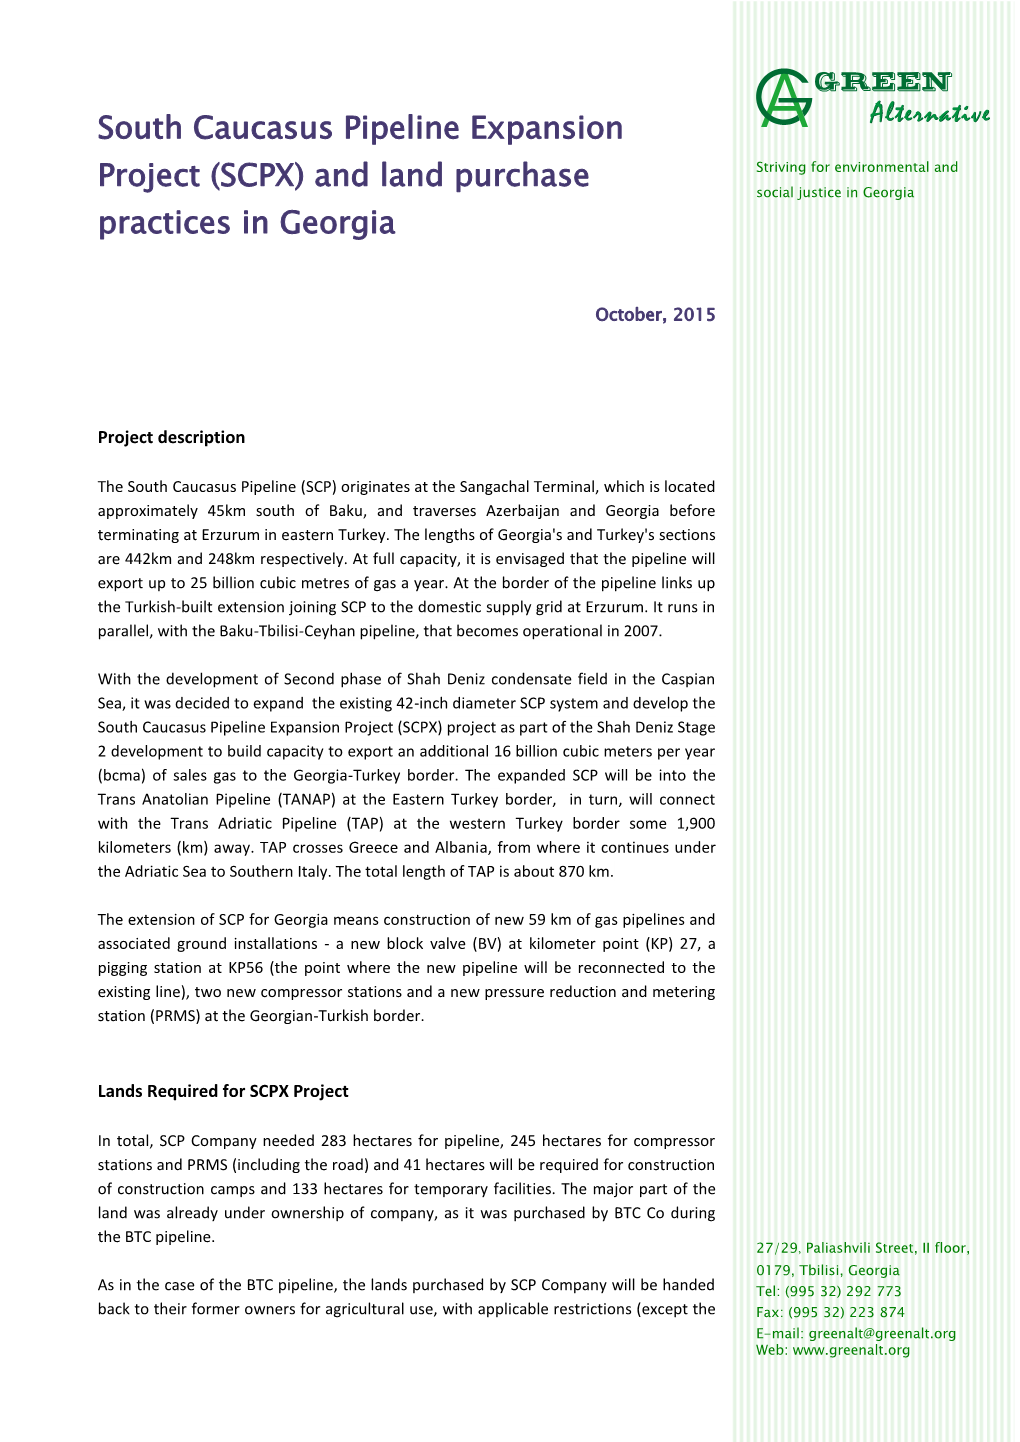 South Caucasus Pipeline Expansion Project (SCPX) and Land Purchase Striving for Environmental and Social Justice in Georgia Practices in Georgia